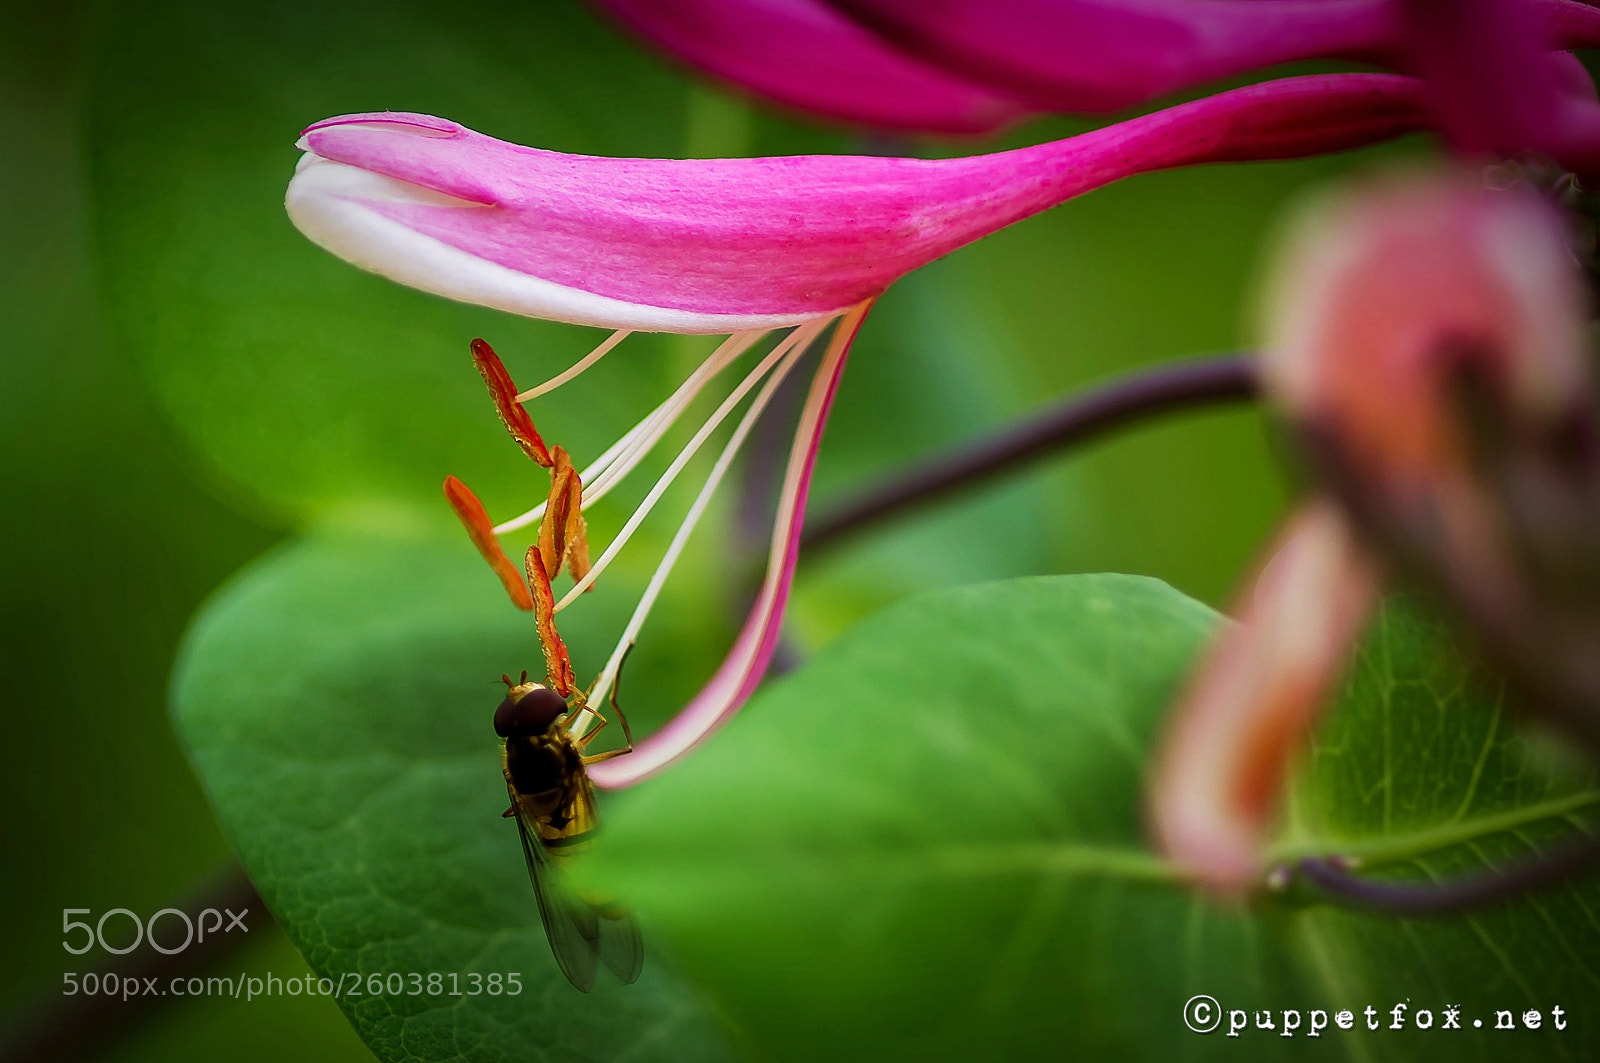 Pentax K-r sample photo. Insect and flower photography